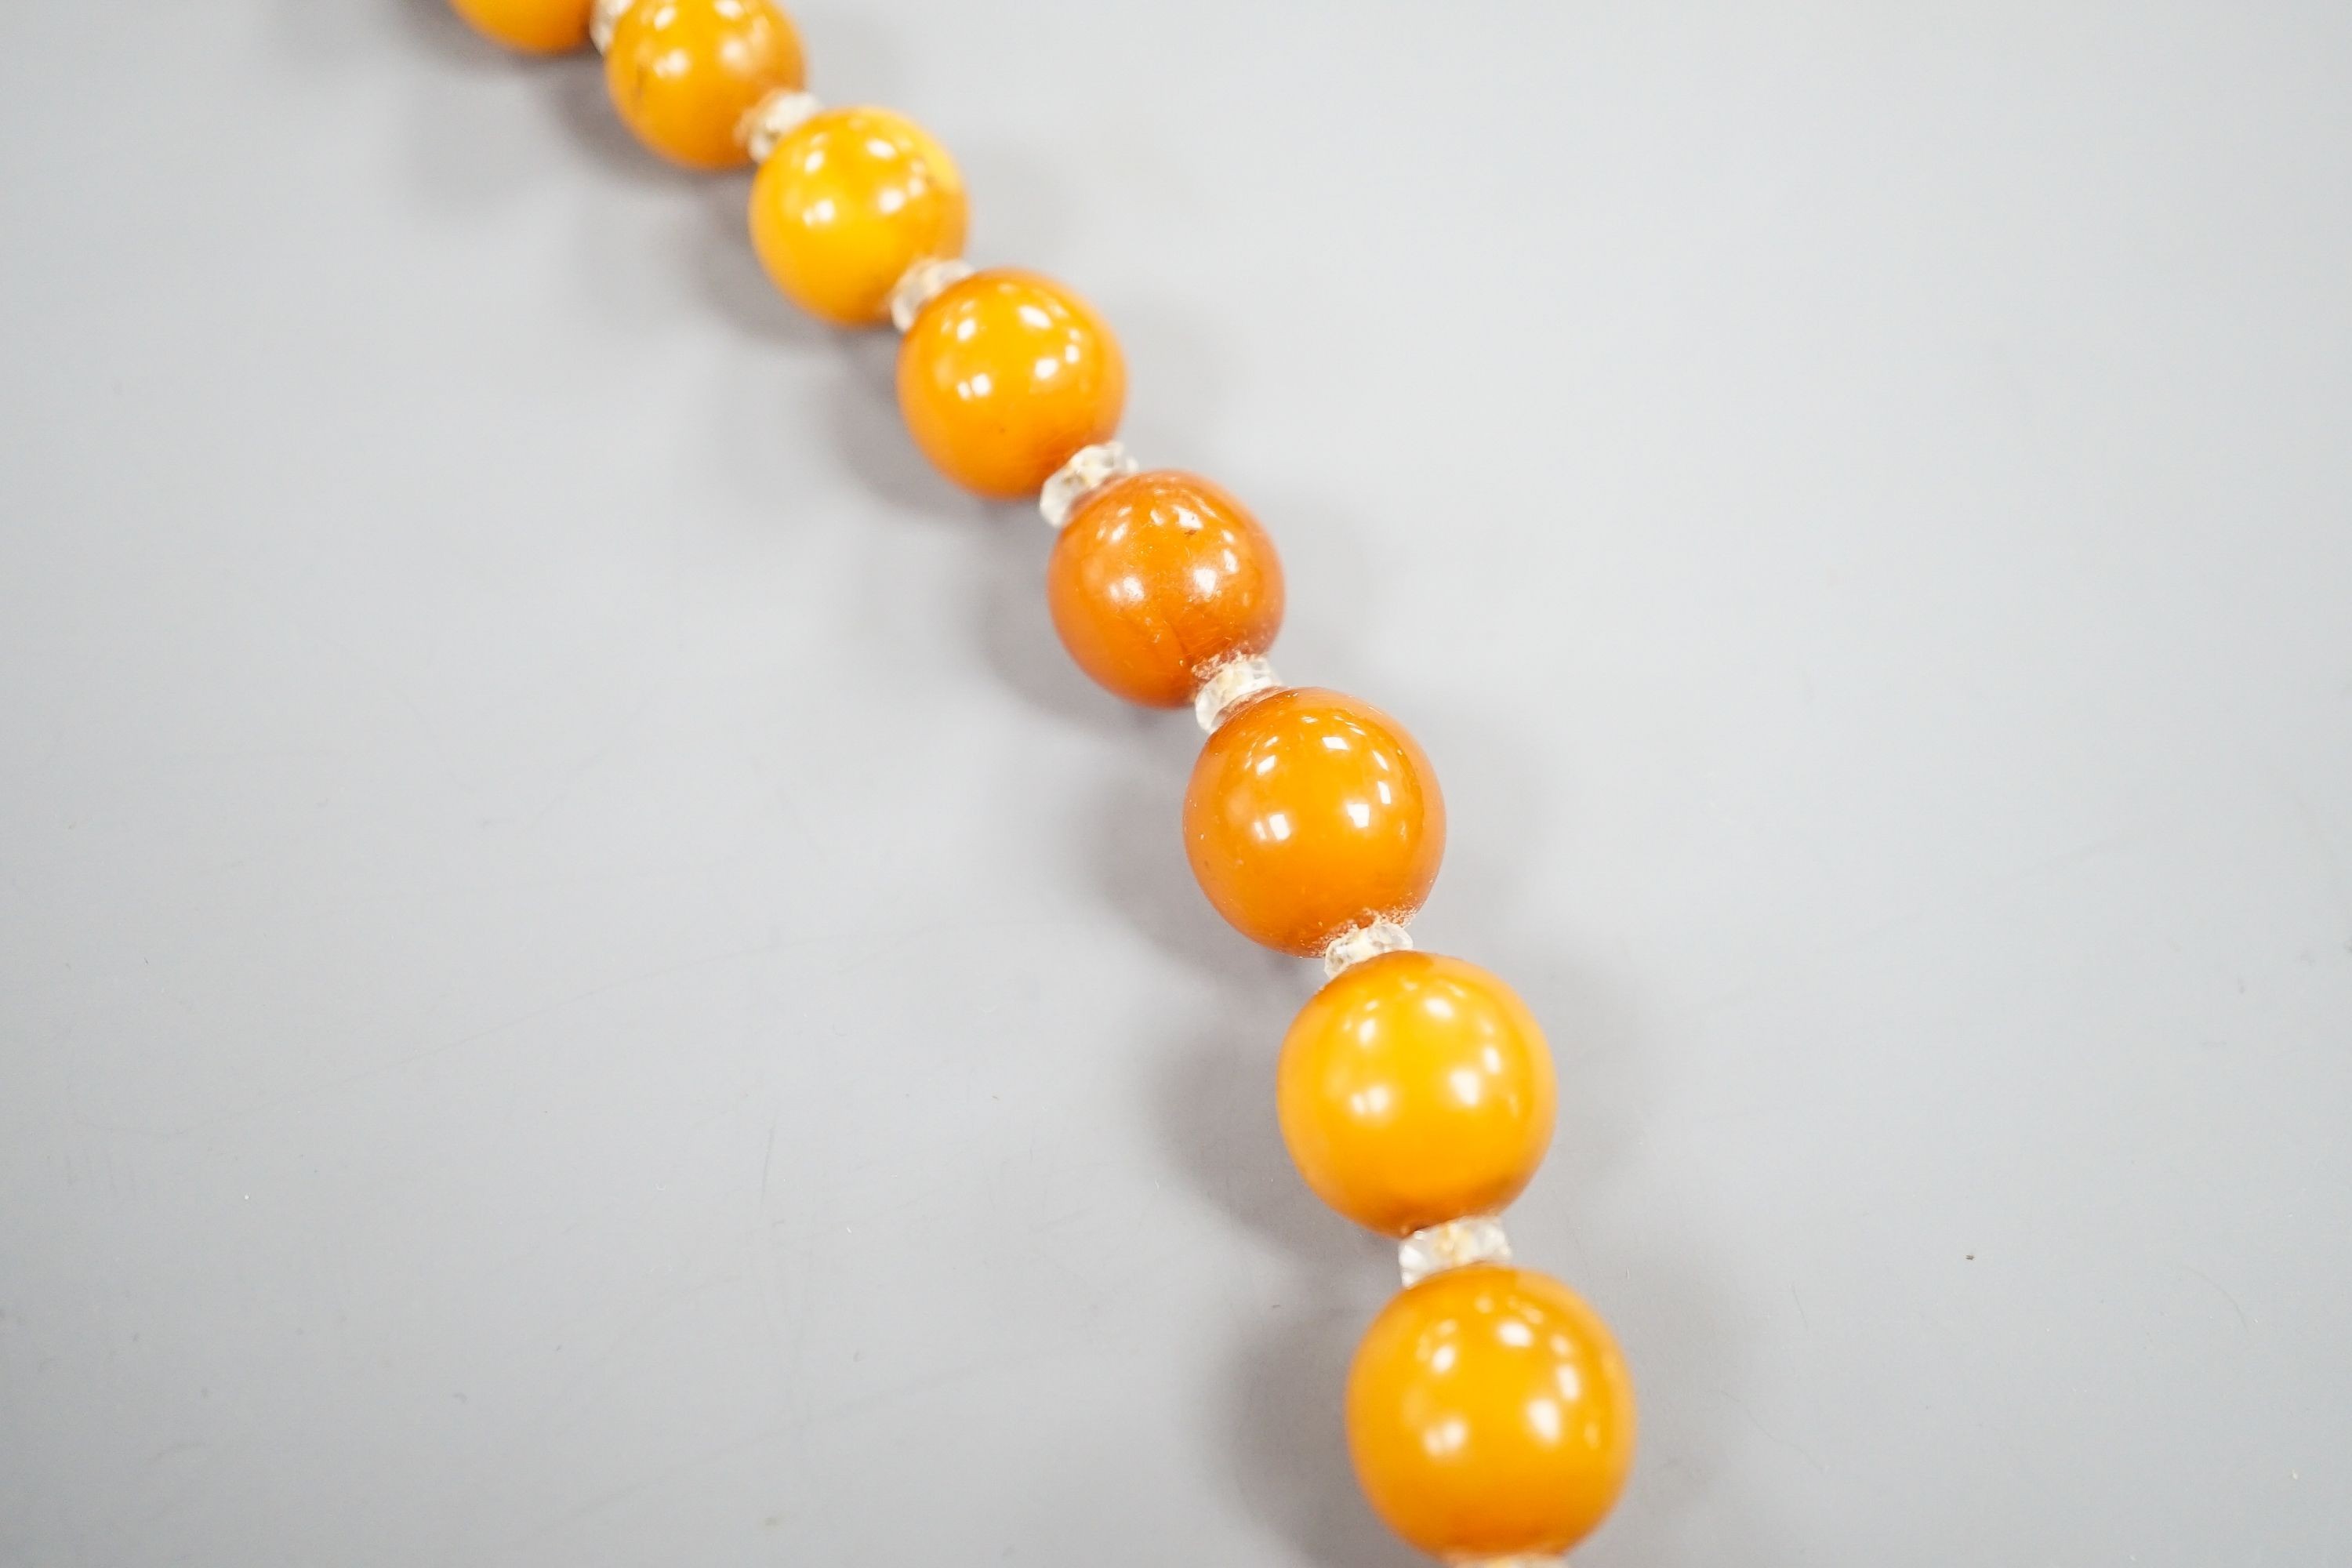 A single strand graduated amber bead necklace, with paste spacers, 42cm, gross weight 31 grams.